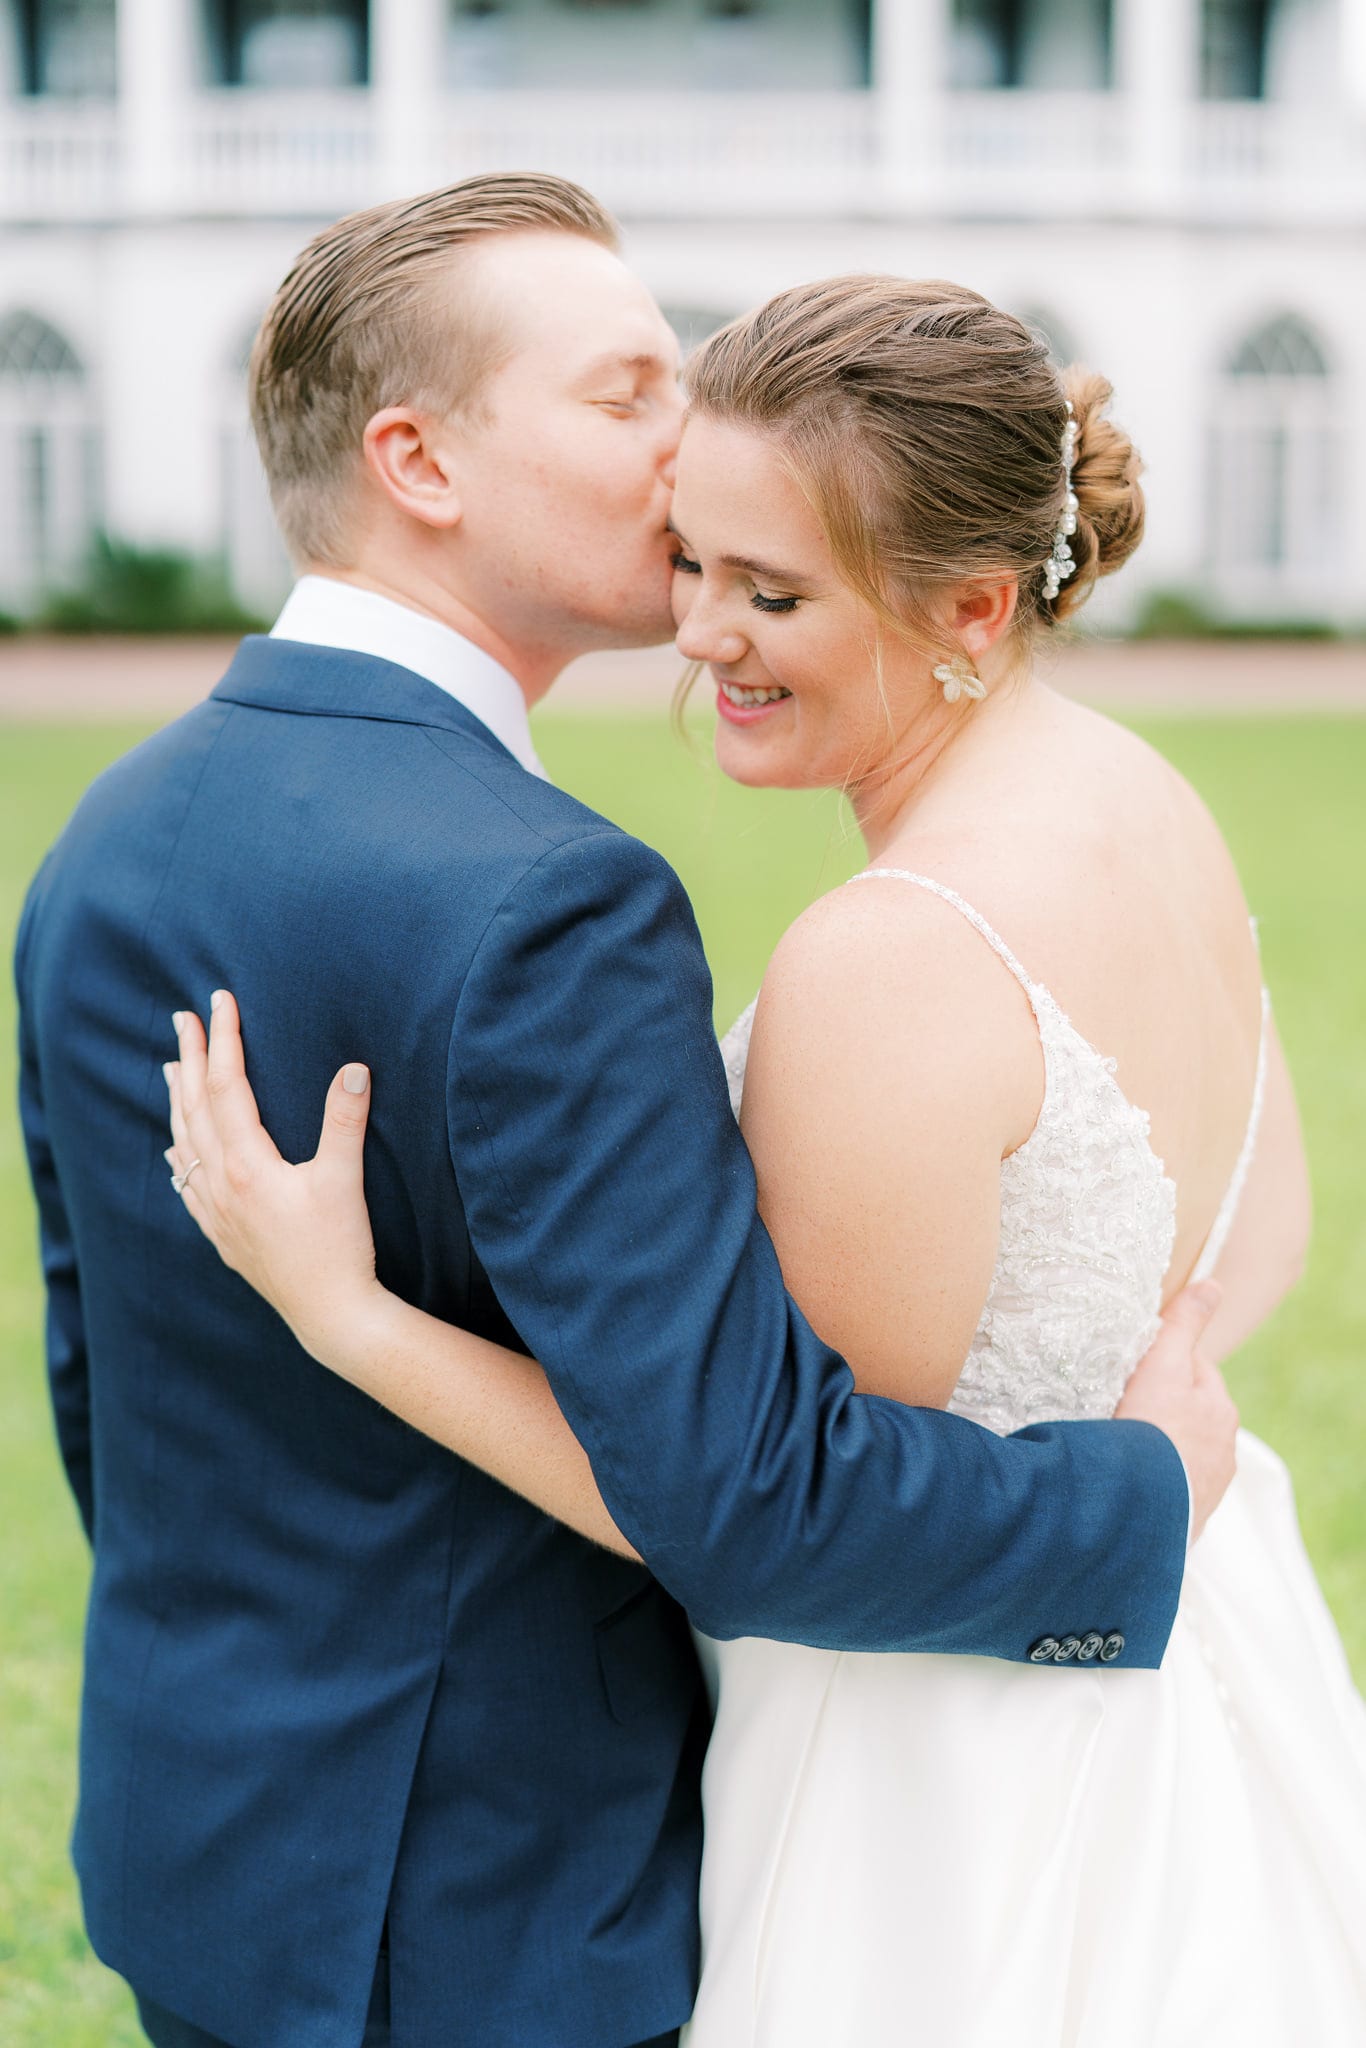 Bride and groom portraits after their first-look at their intimate wedding day at Lowndes Grove